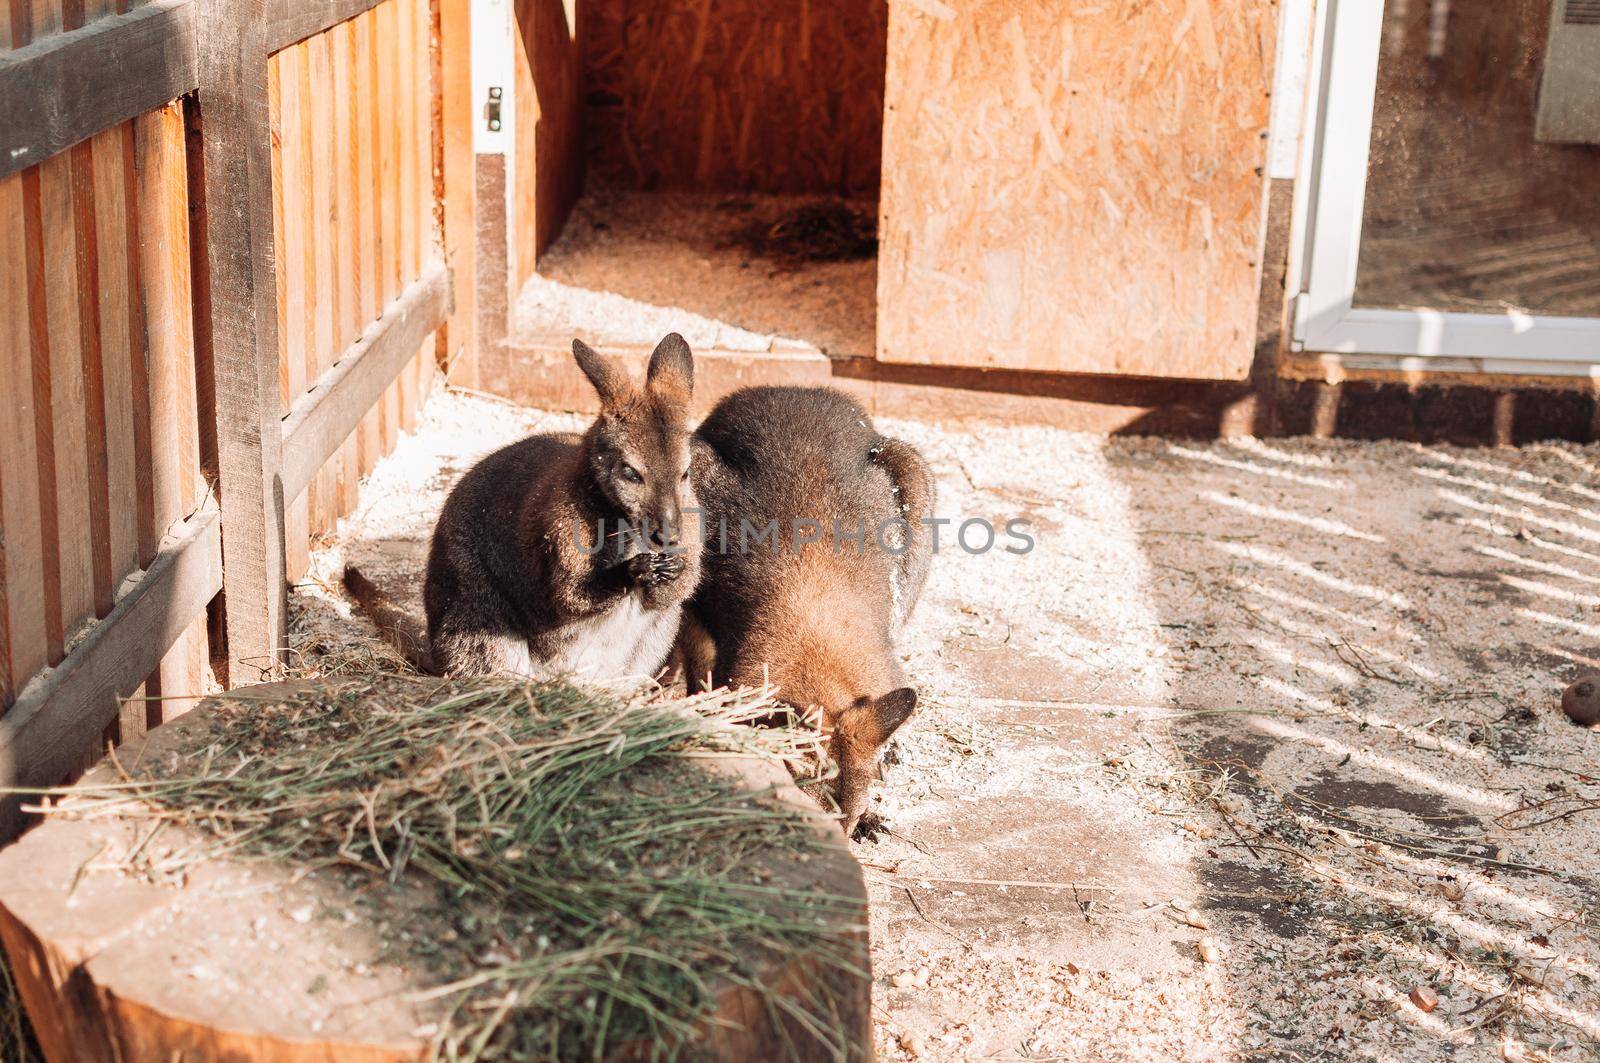 two baby kangaroos stand in a paddock near a haystack. Mammals live in the family zoo.